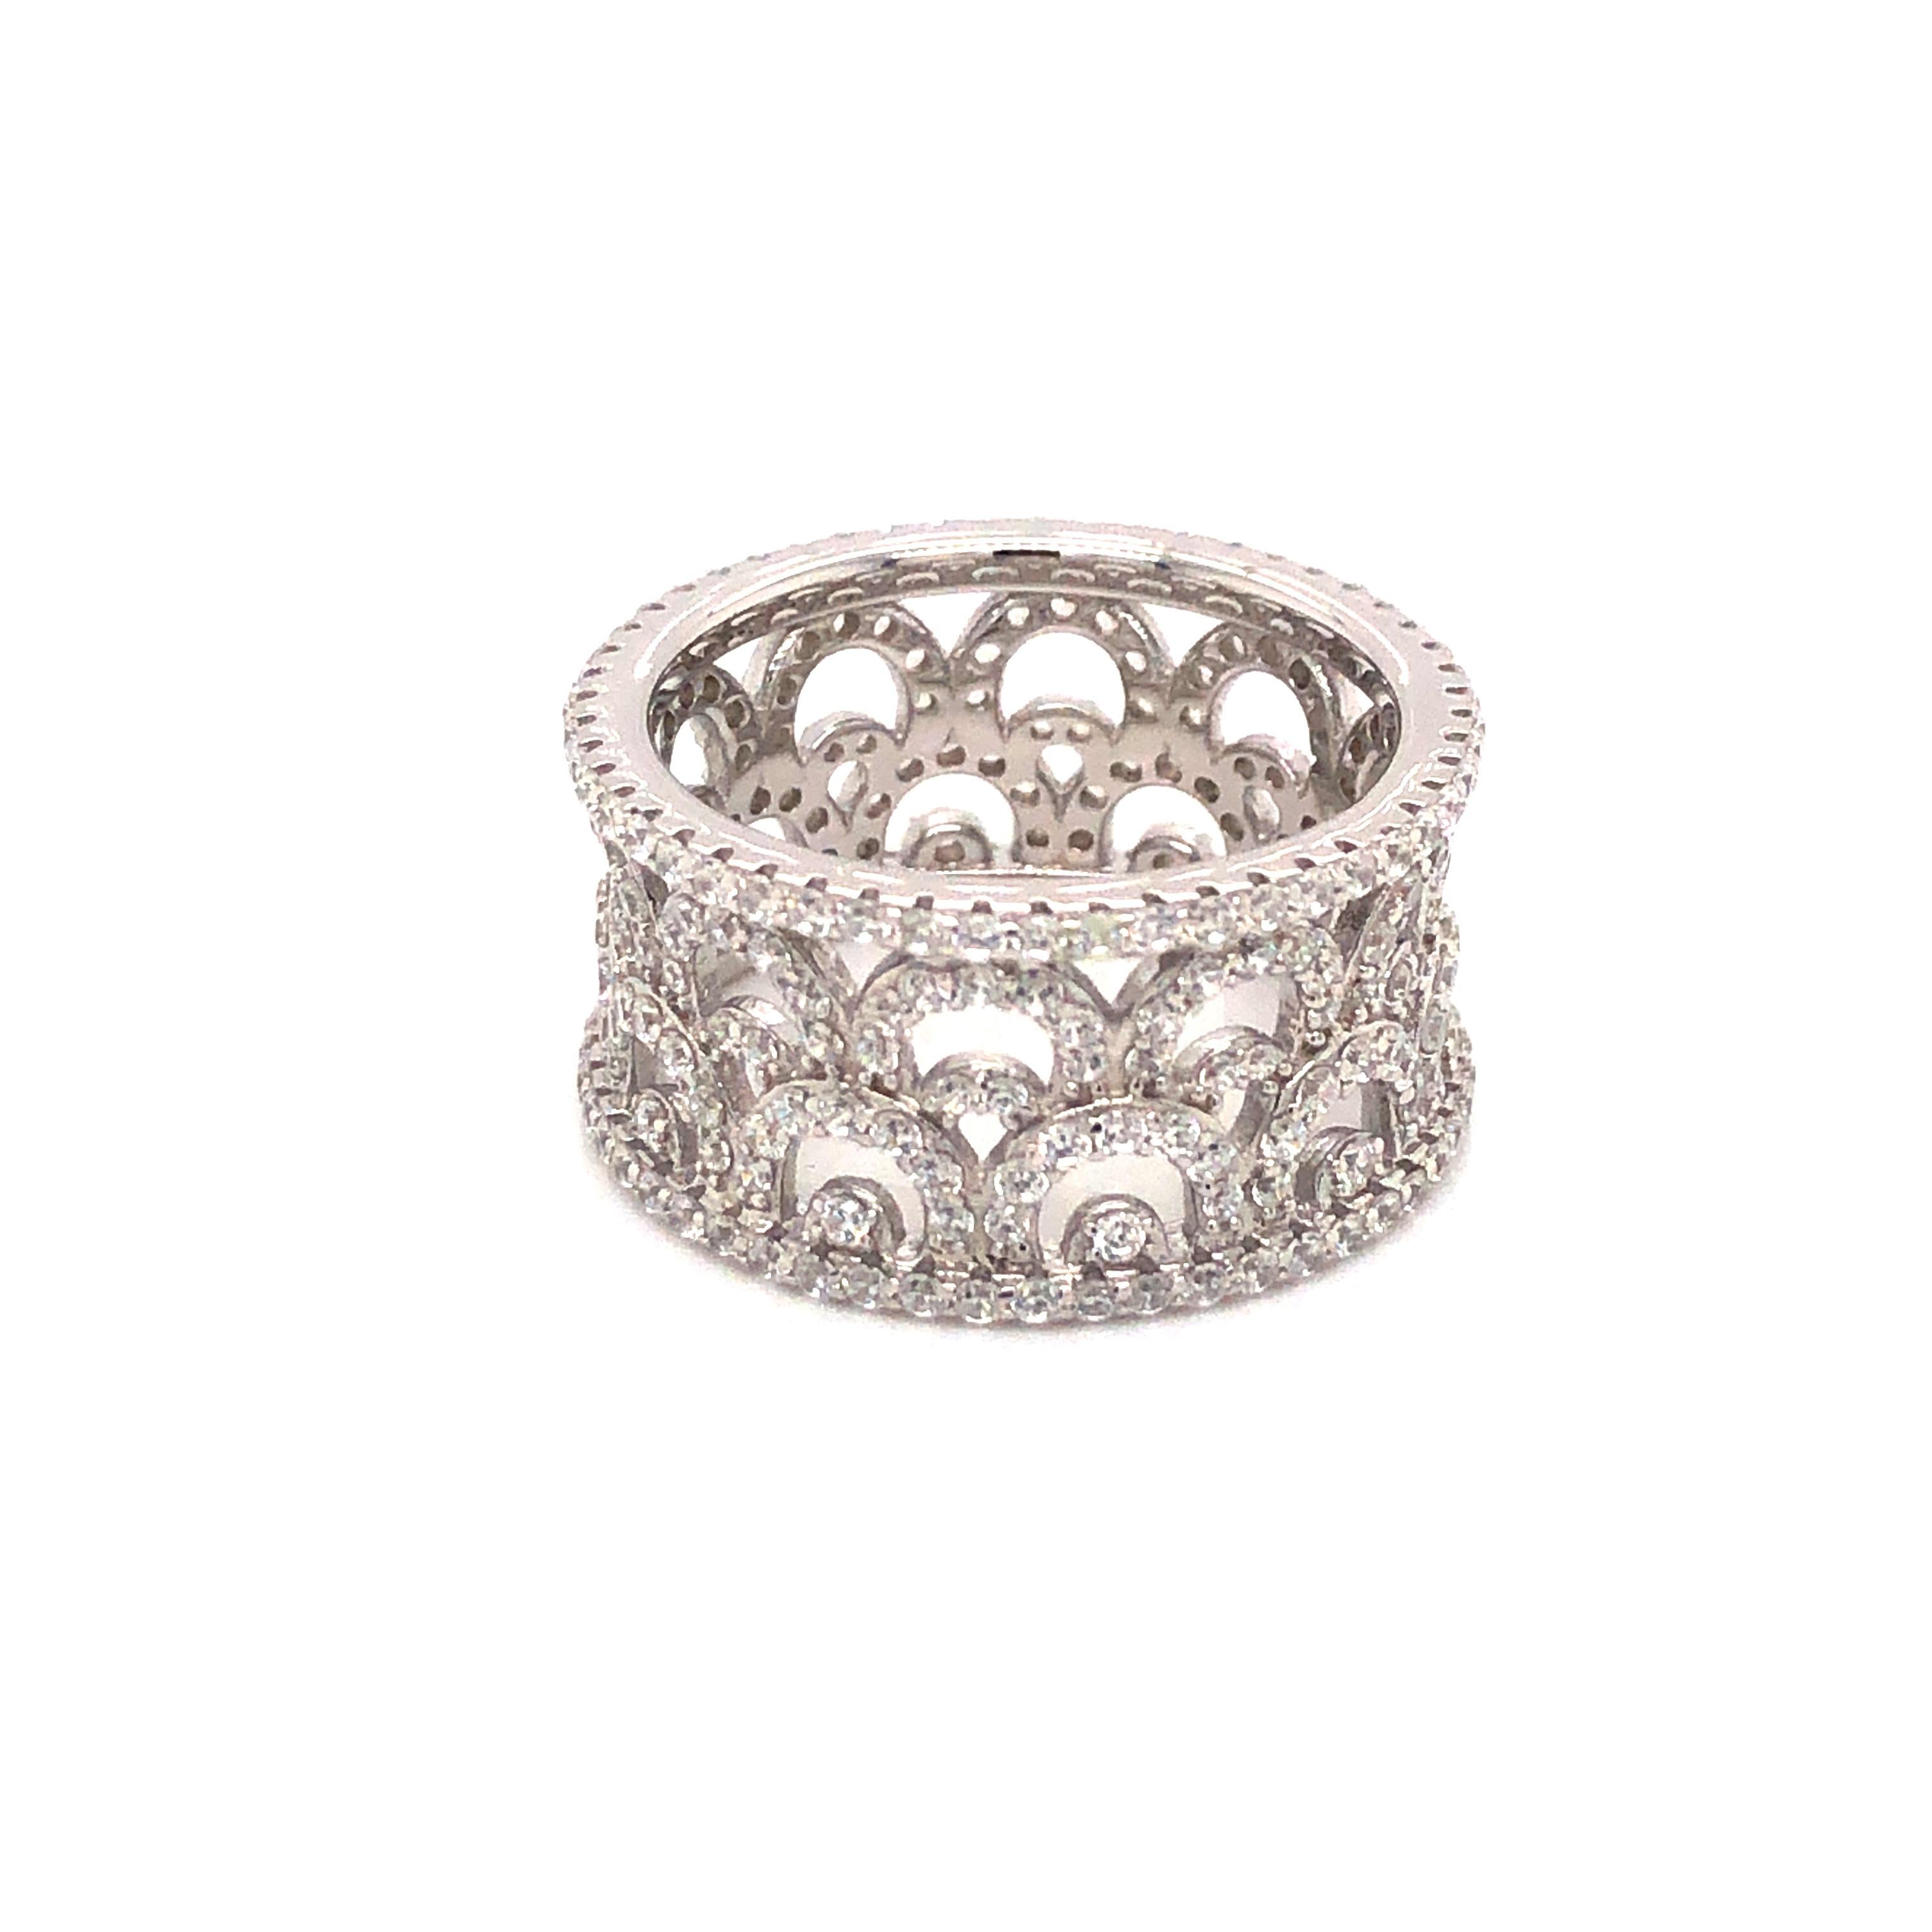 This intricately detailed women's wide eternity band features 3.40ct of round brilliant cut cubic zirconia.
The fashionably wide vintage design is set in 925 sterling silver and finished in either a high gloss white rhodium or 14kt rose gold or 14kt